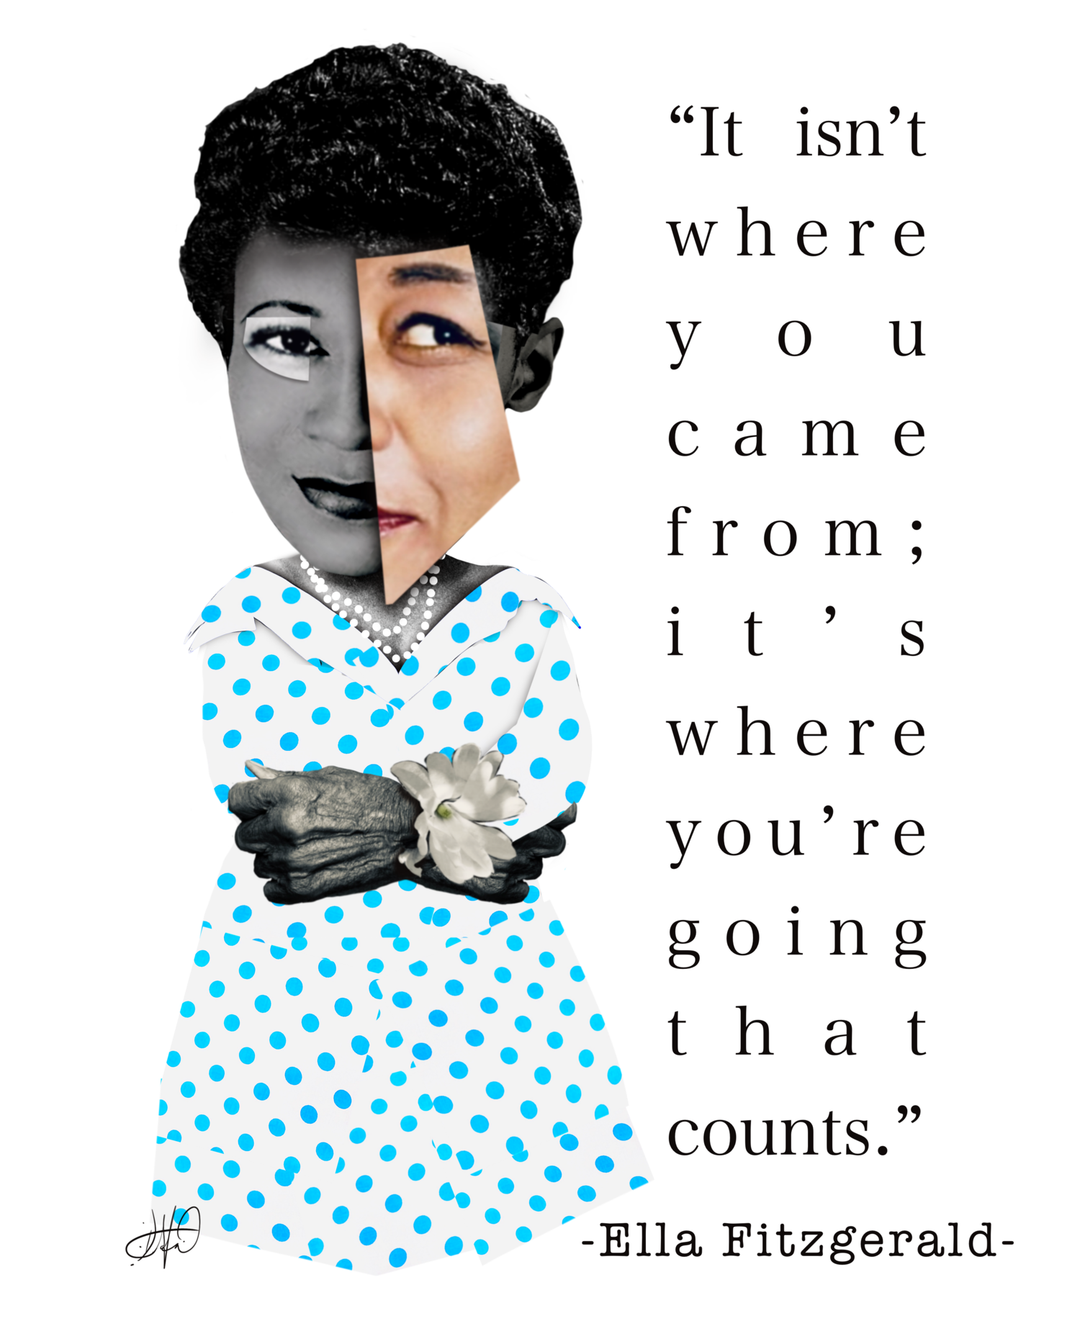 It isn't where you came from; it's where you're going that counts. Ella Fitzgerald